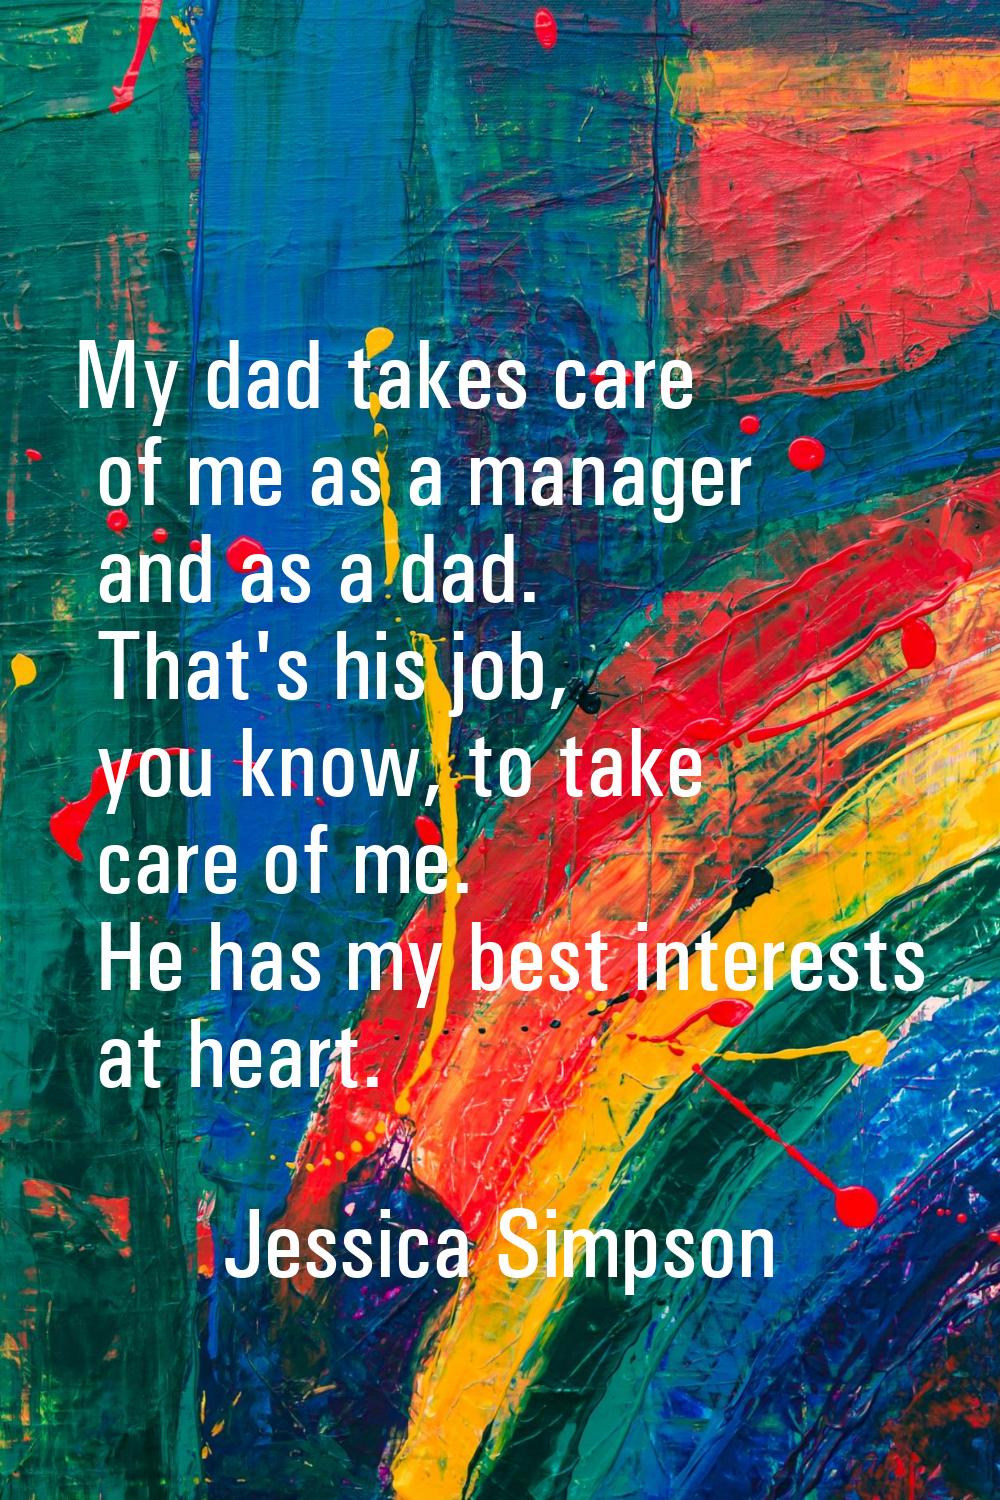 My dad takes care of me as a manager and as a dad. That's his job, you know, to take care of me. He